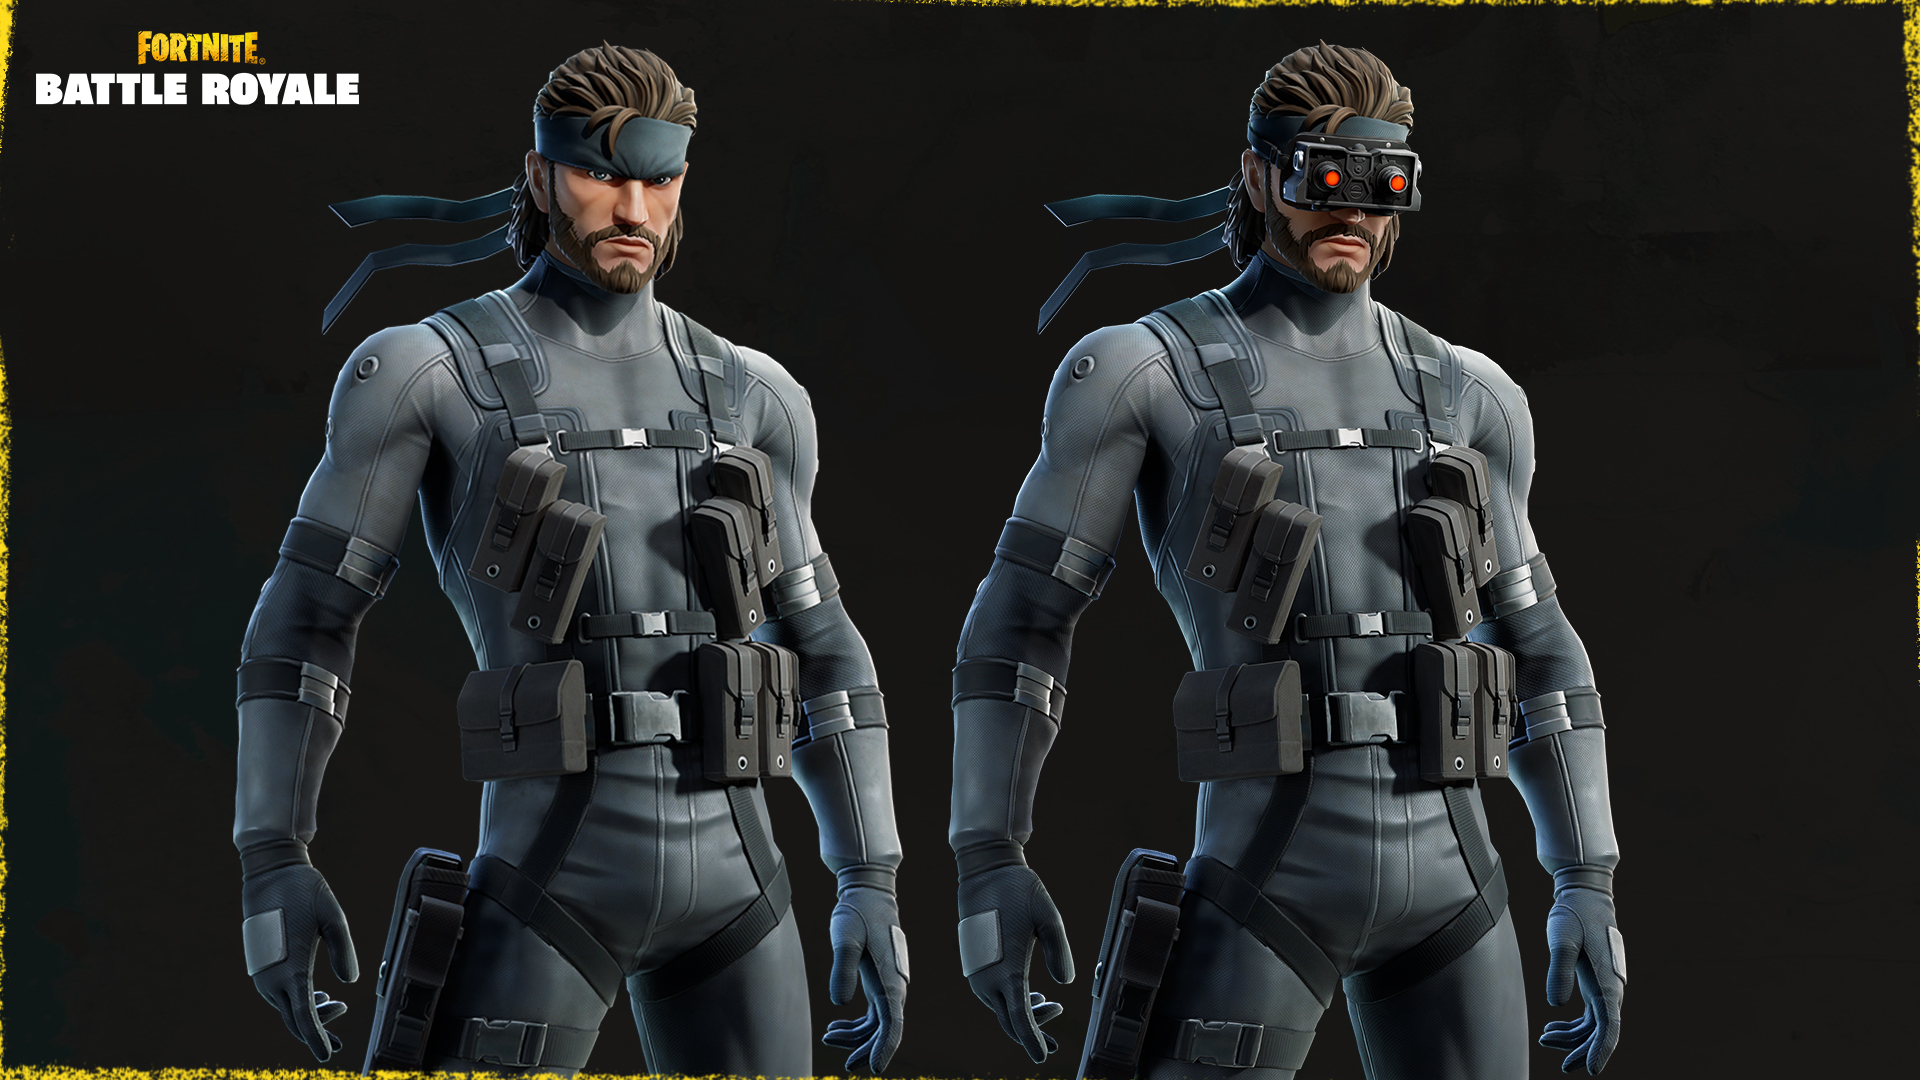 fortnite-solid-snake-outfit-1920x1080-92930be93f6a